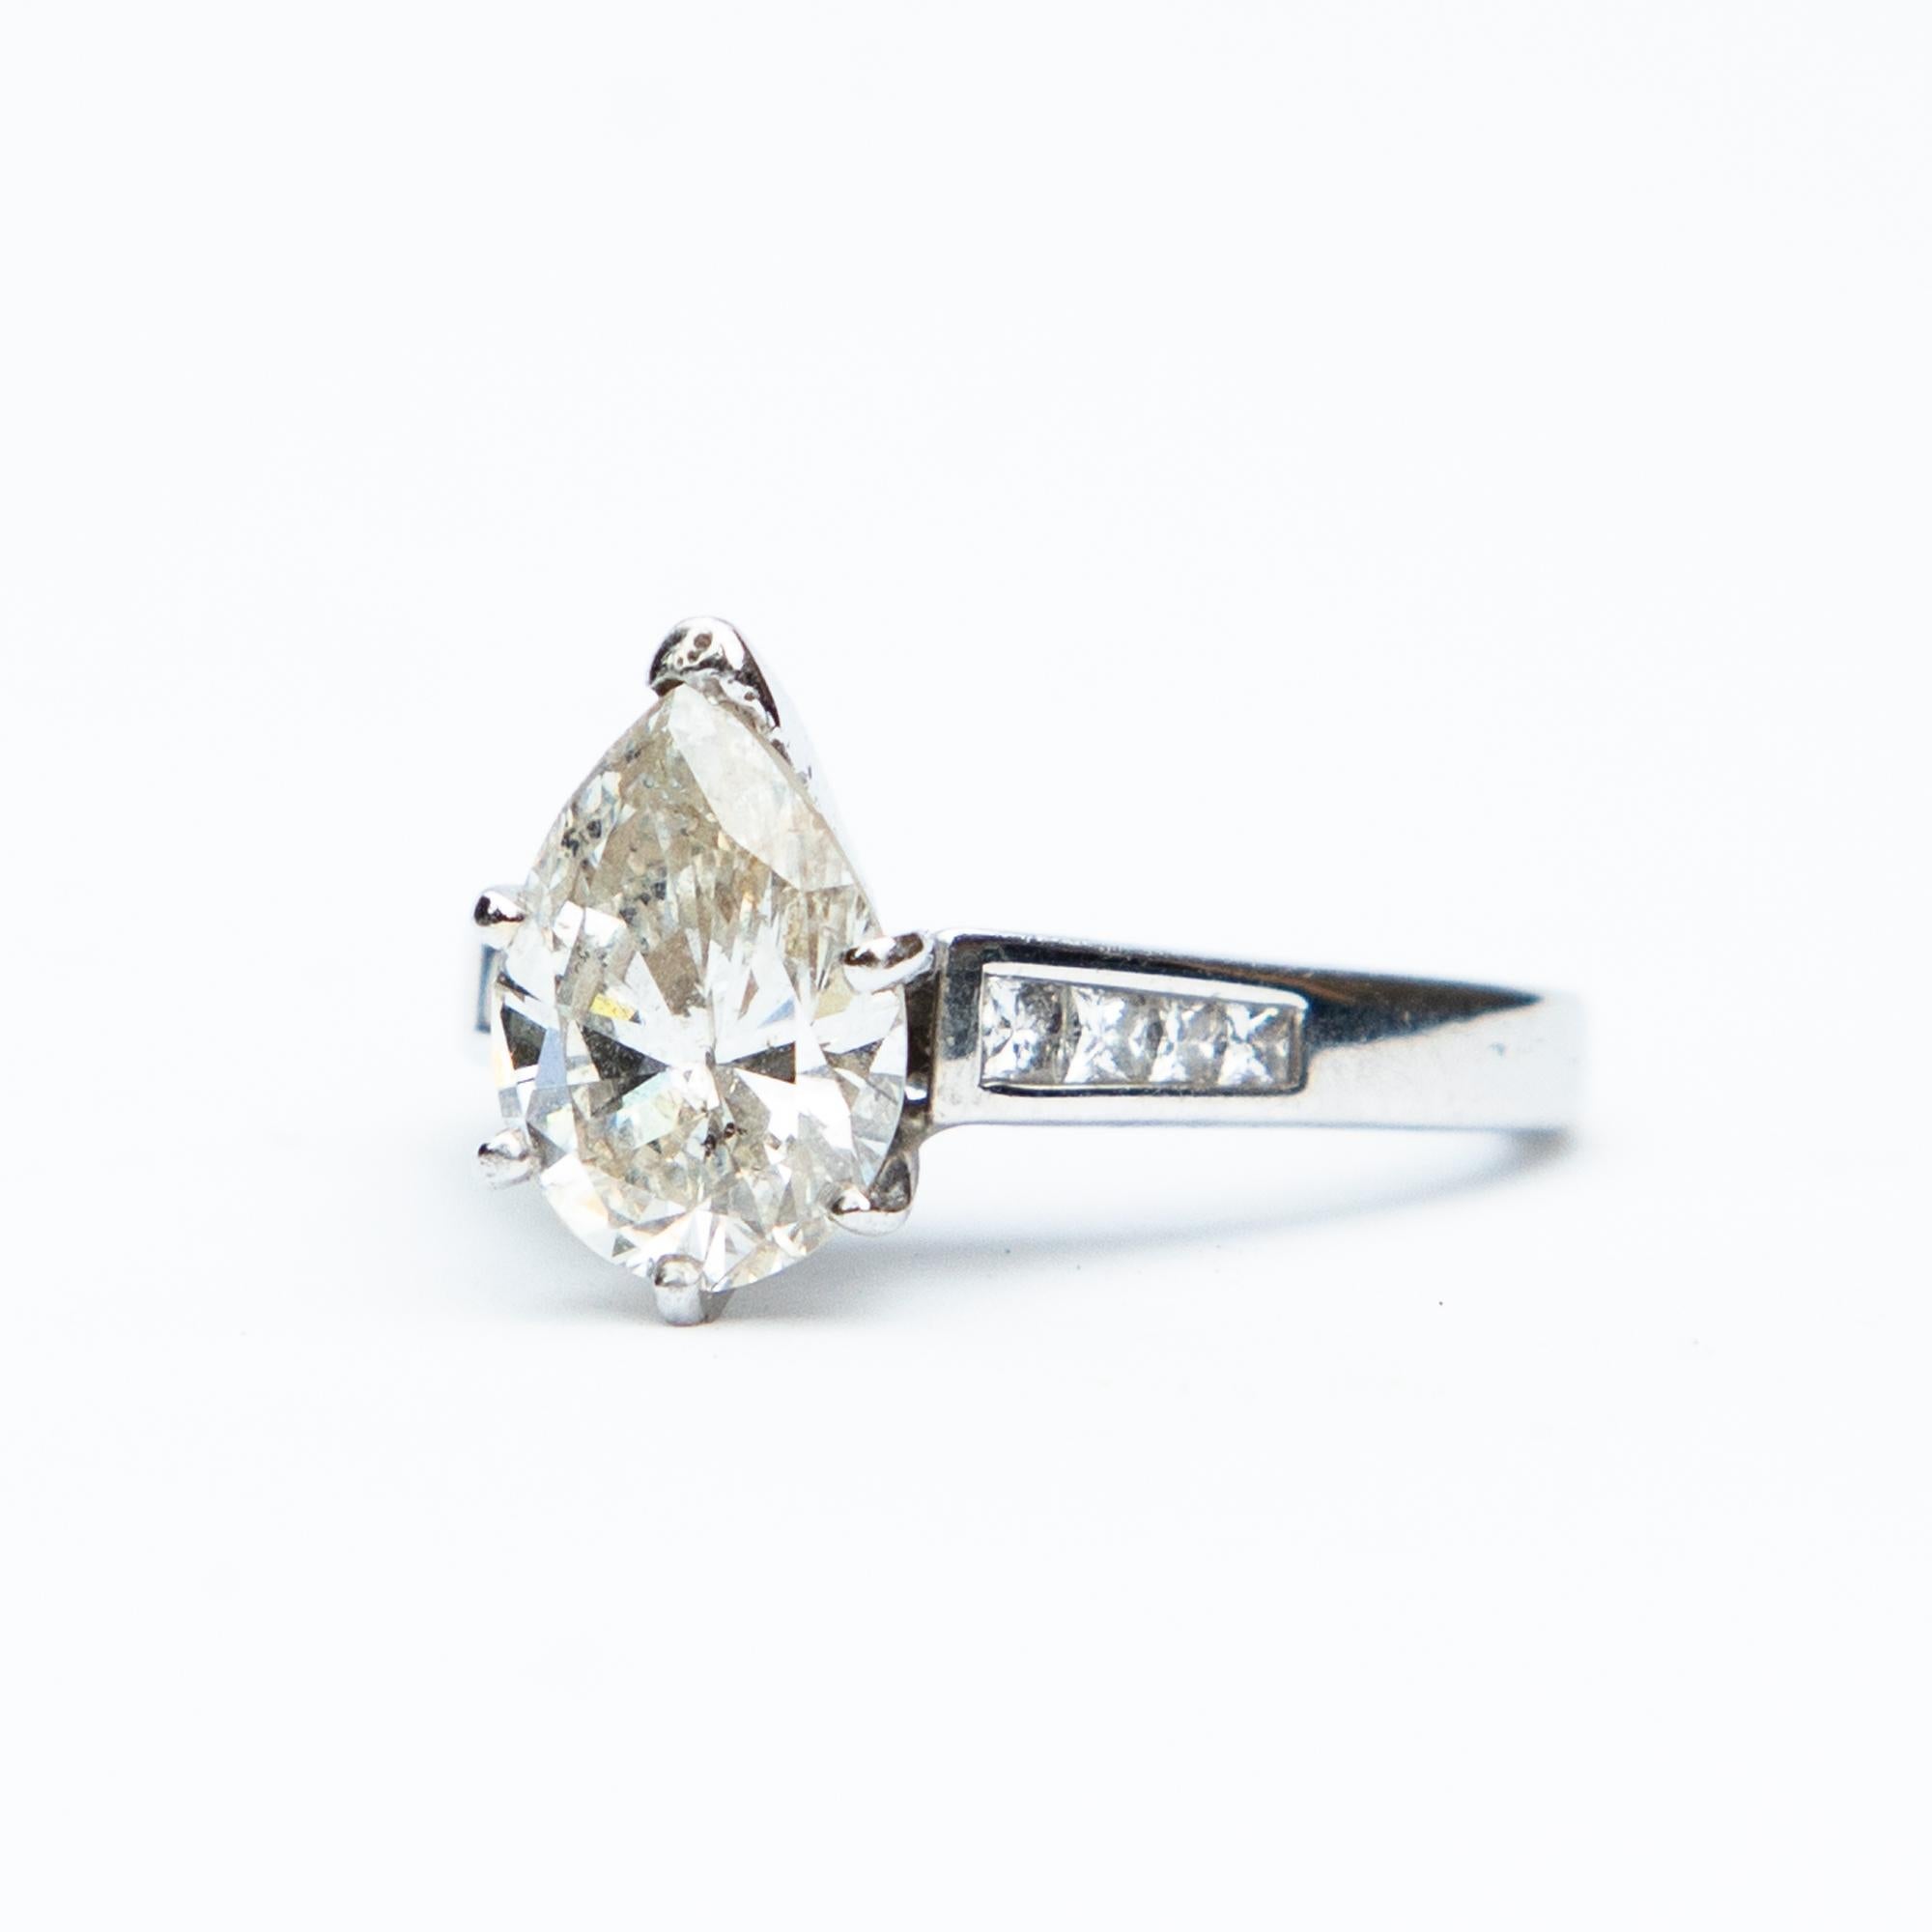 This a sensational Art Deco inspired  pear cut solitaire platinum and diamond ring. The central Diamond measures an 1 carat 32, beautifully set in a raised fourteen carat white gold setting with princess cut diamond shoulders. Total diamond weight